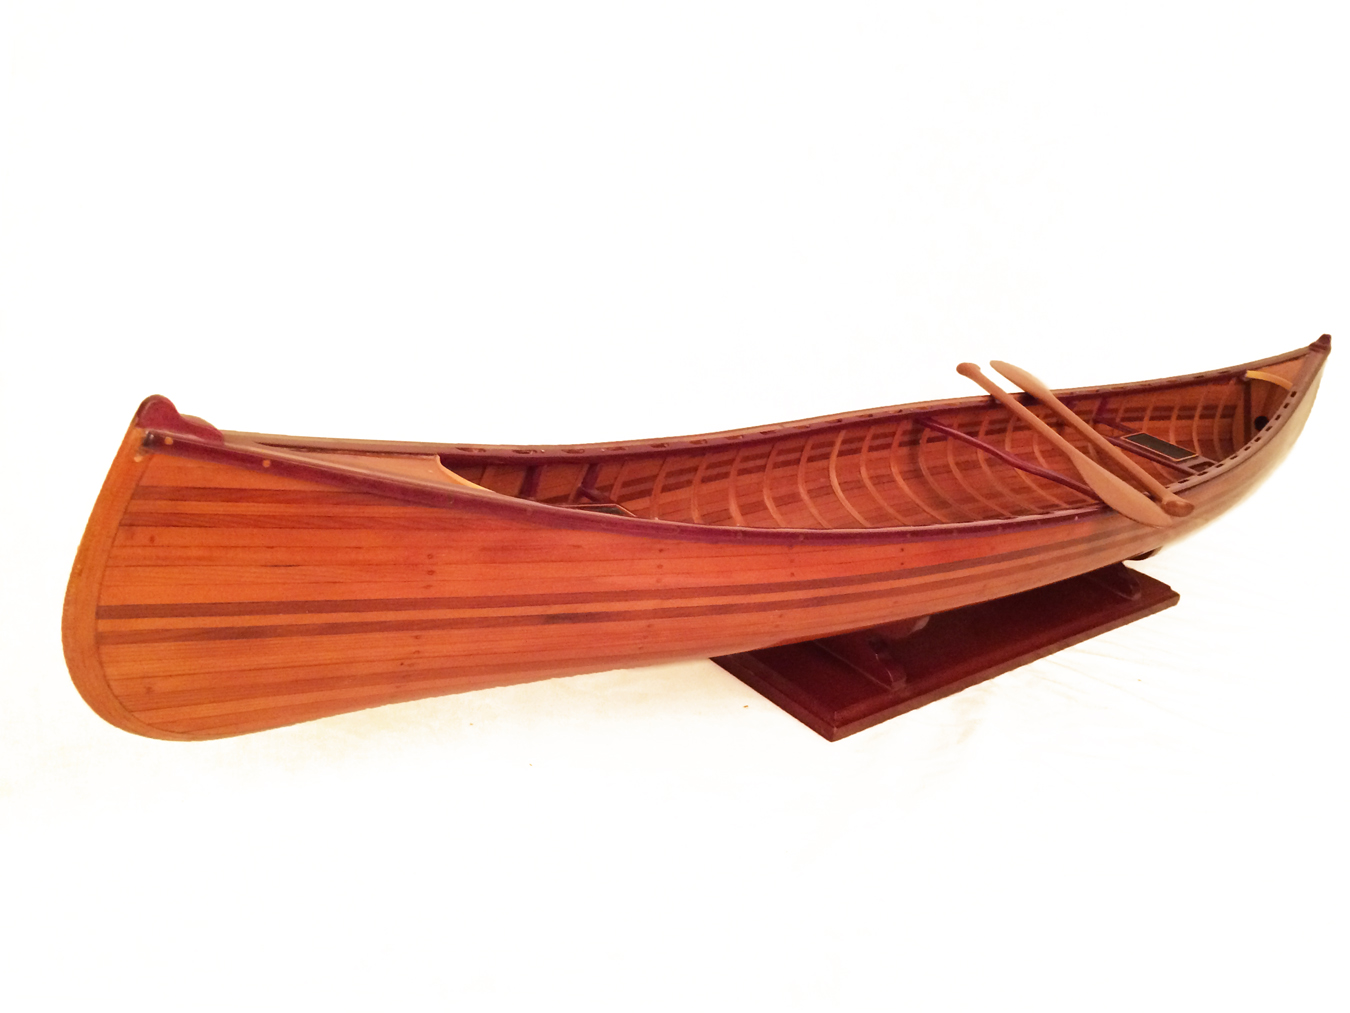 This is quite a large model at 42″ long, so it you would like to 